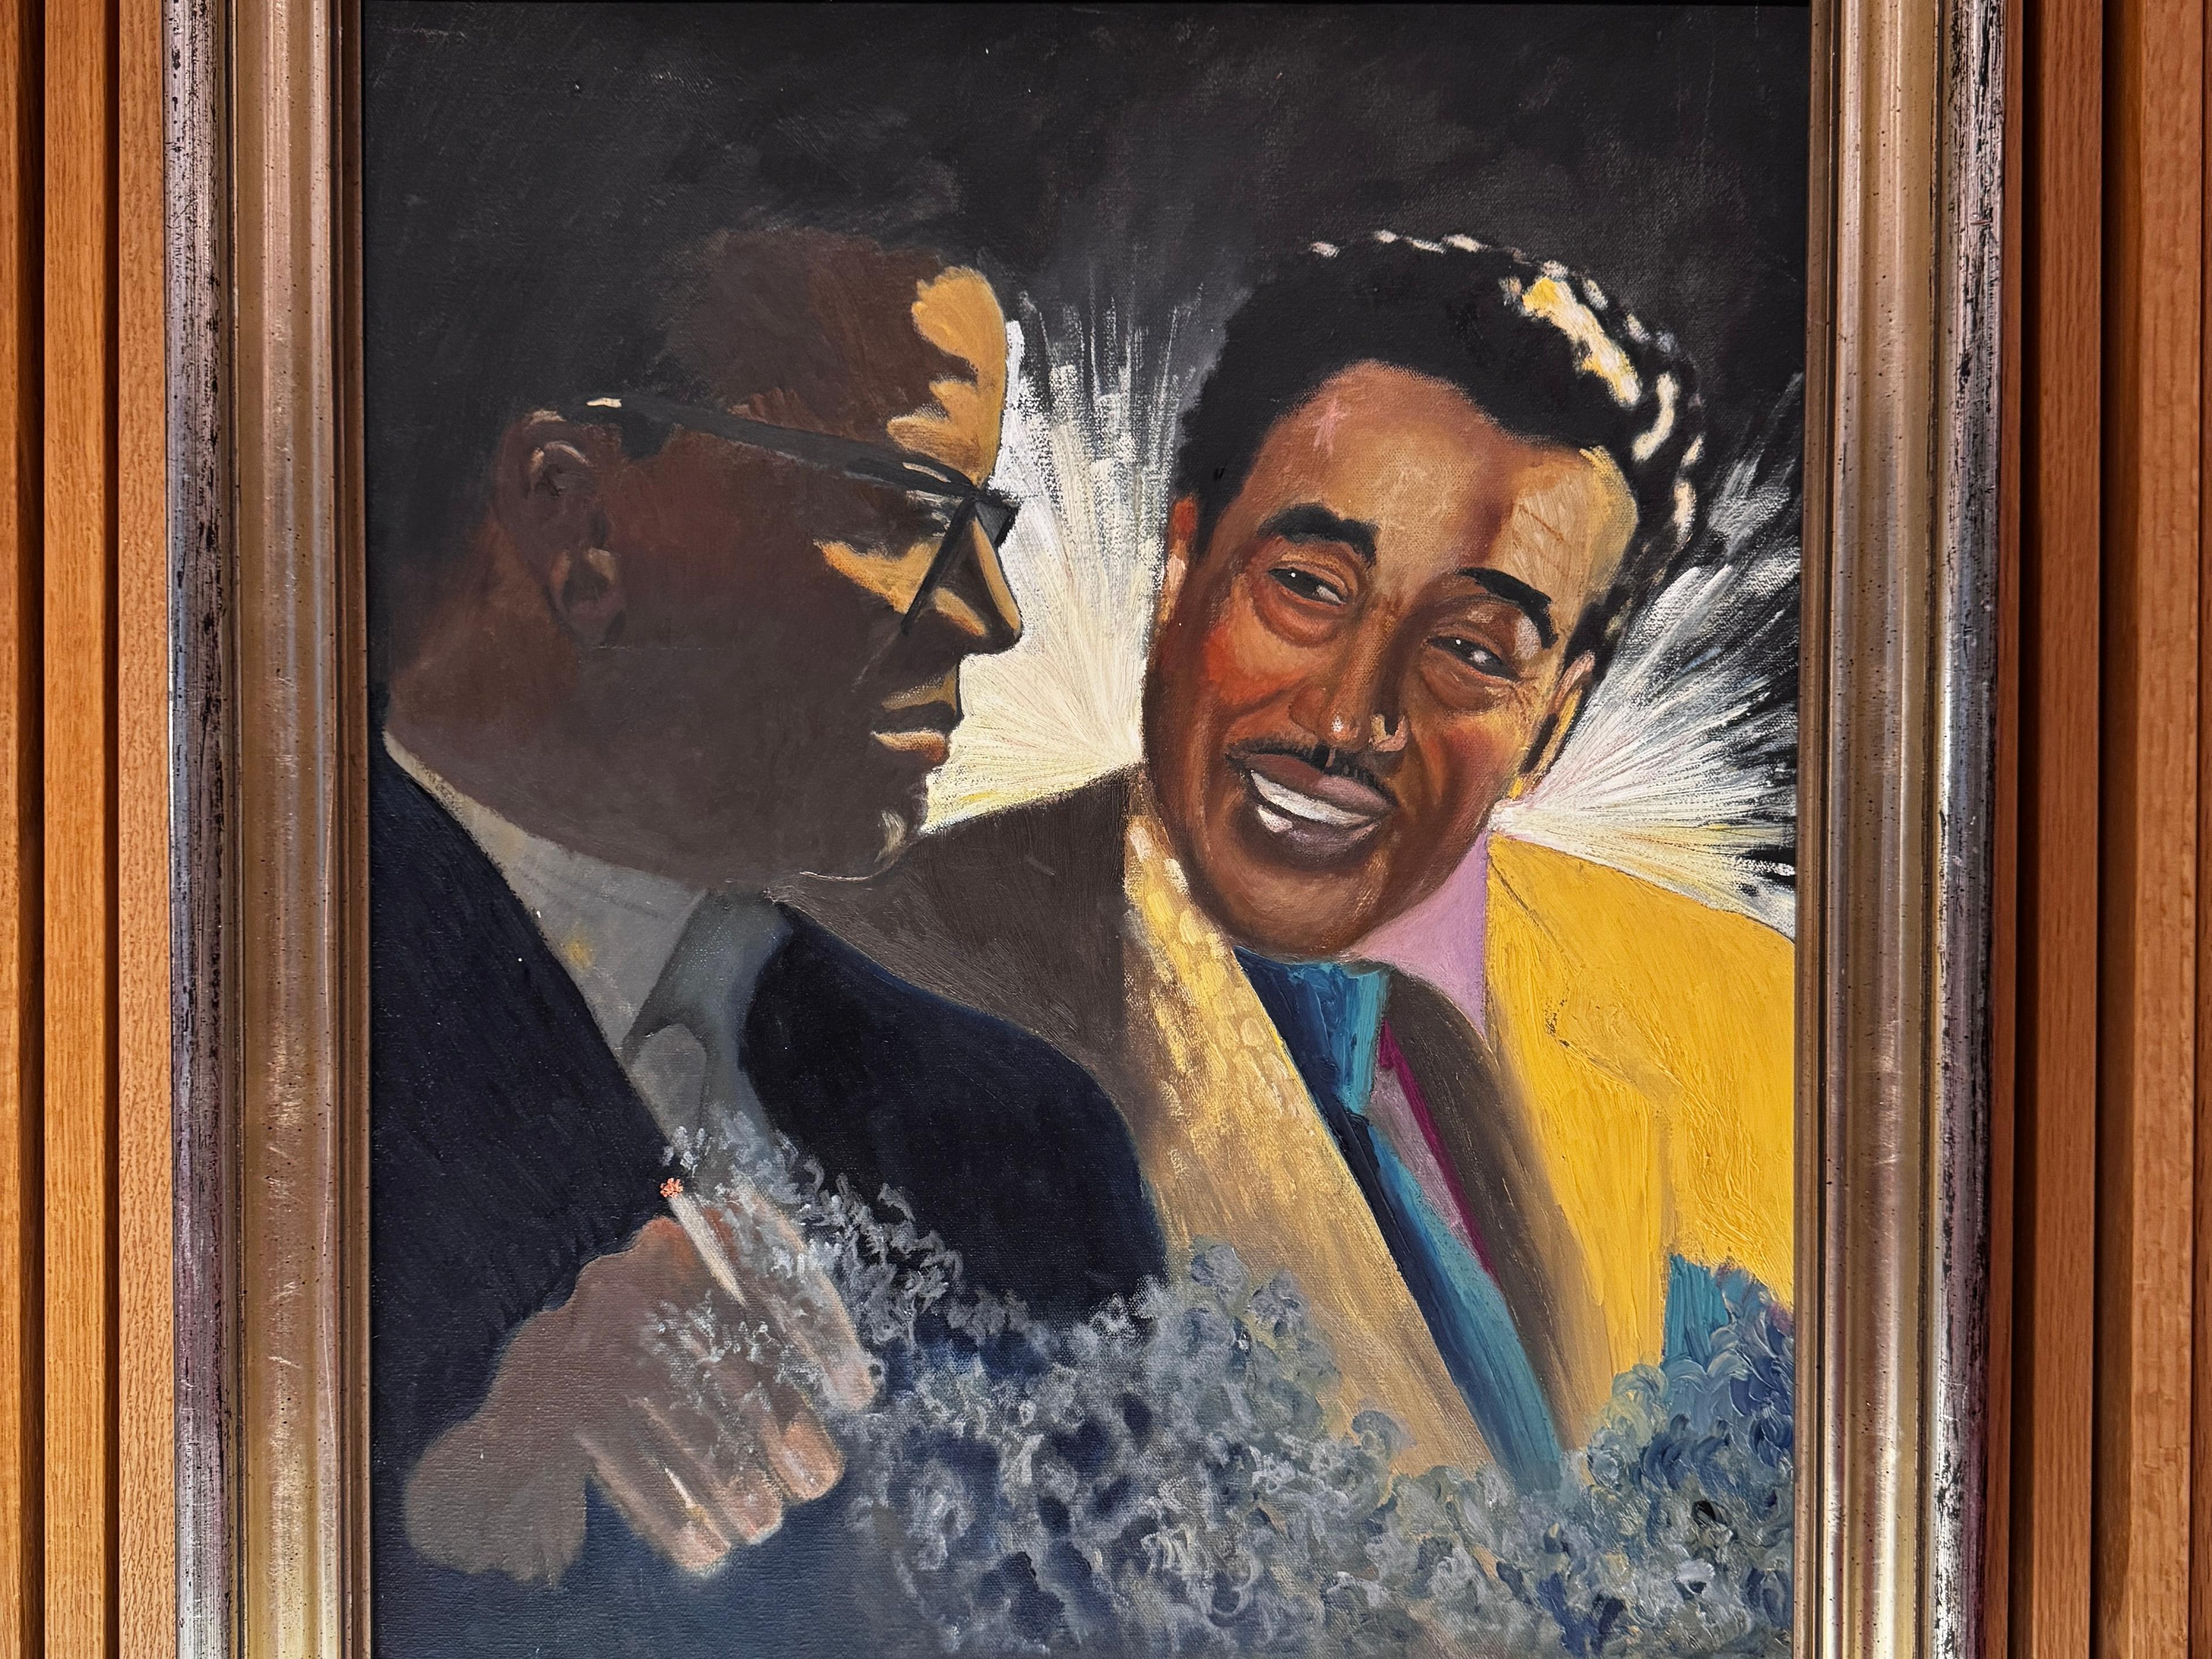 A framed painting of two men standing next to each other